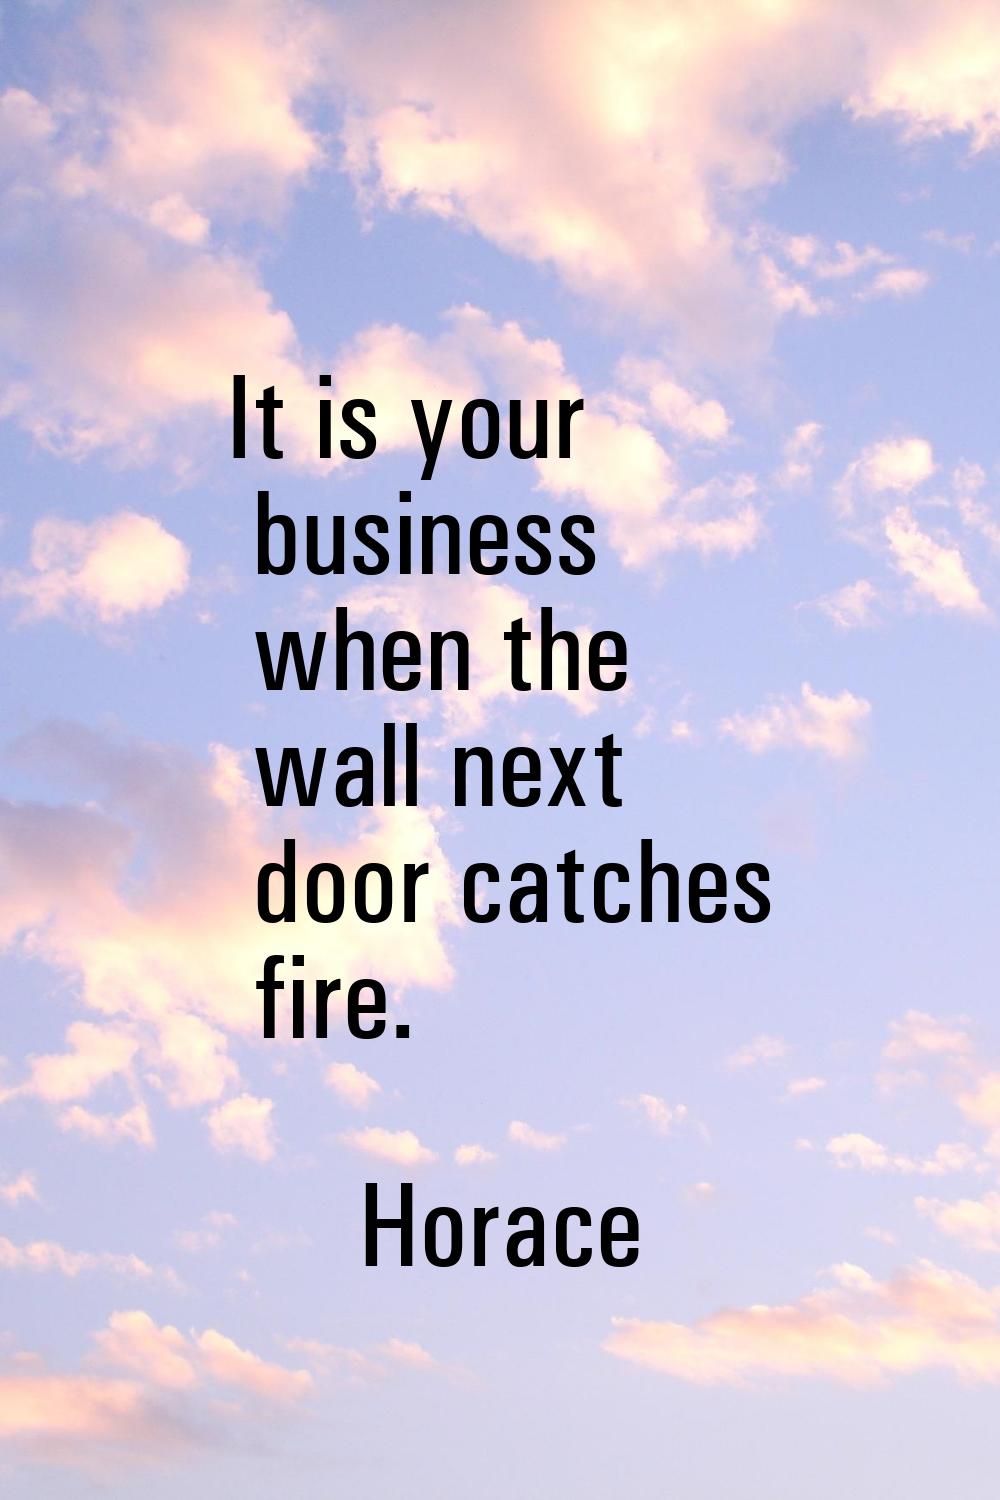 It is your business when the wall next door catches fire.